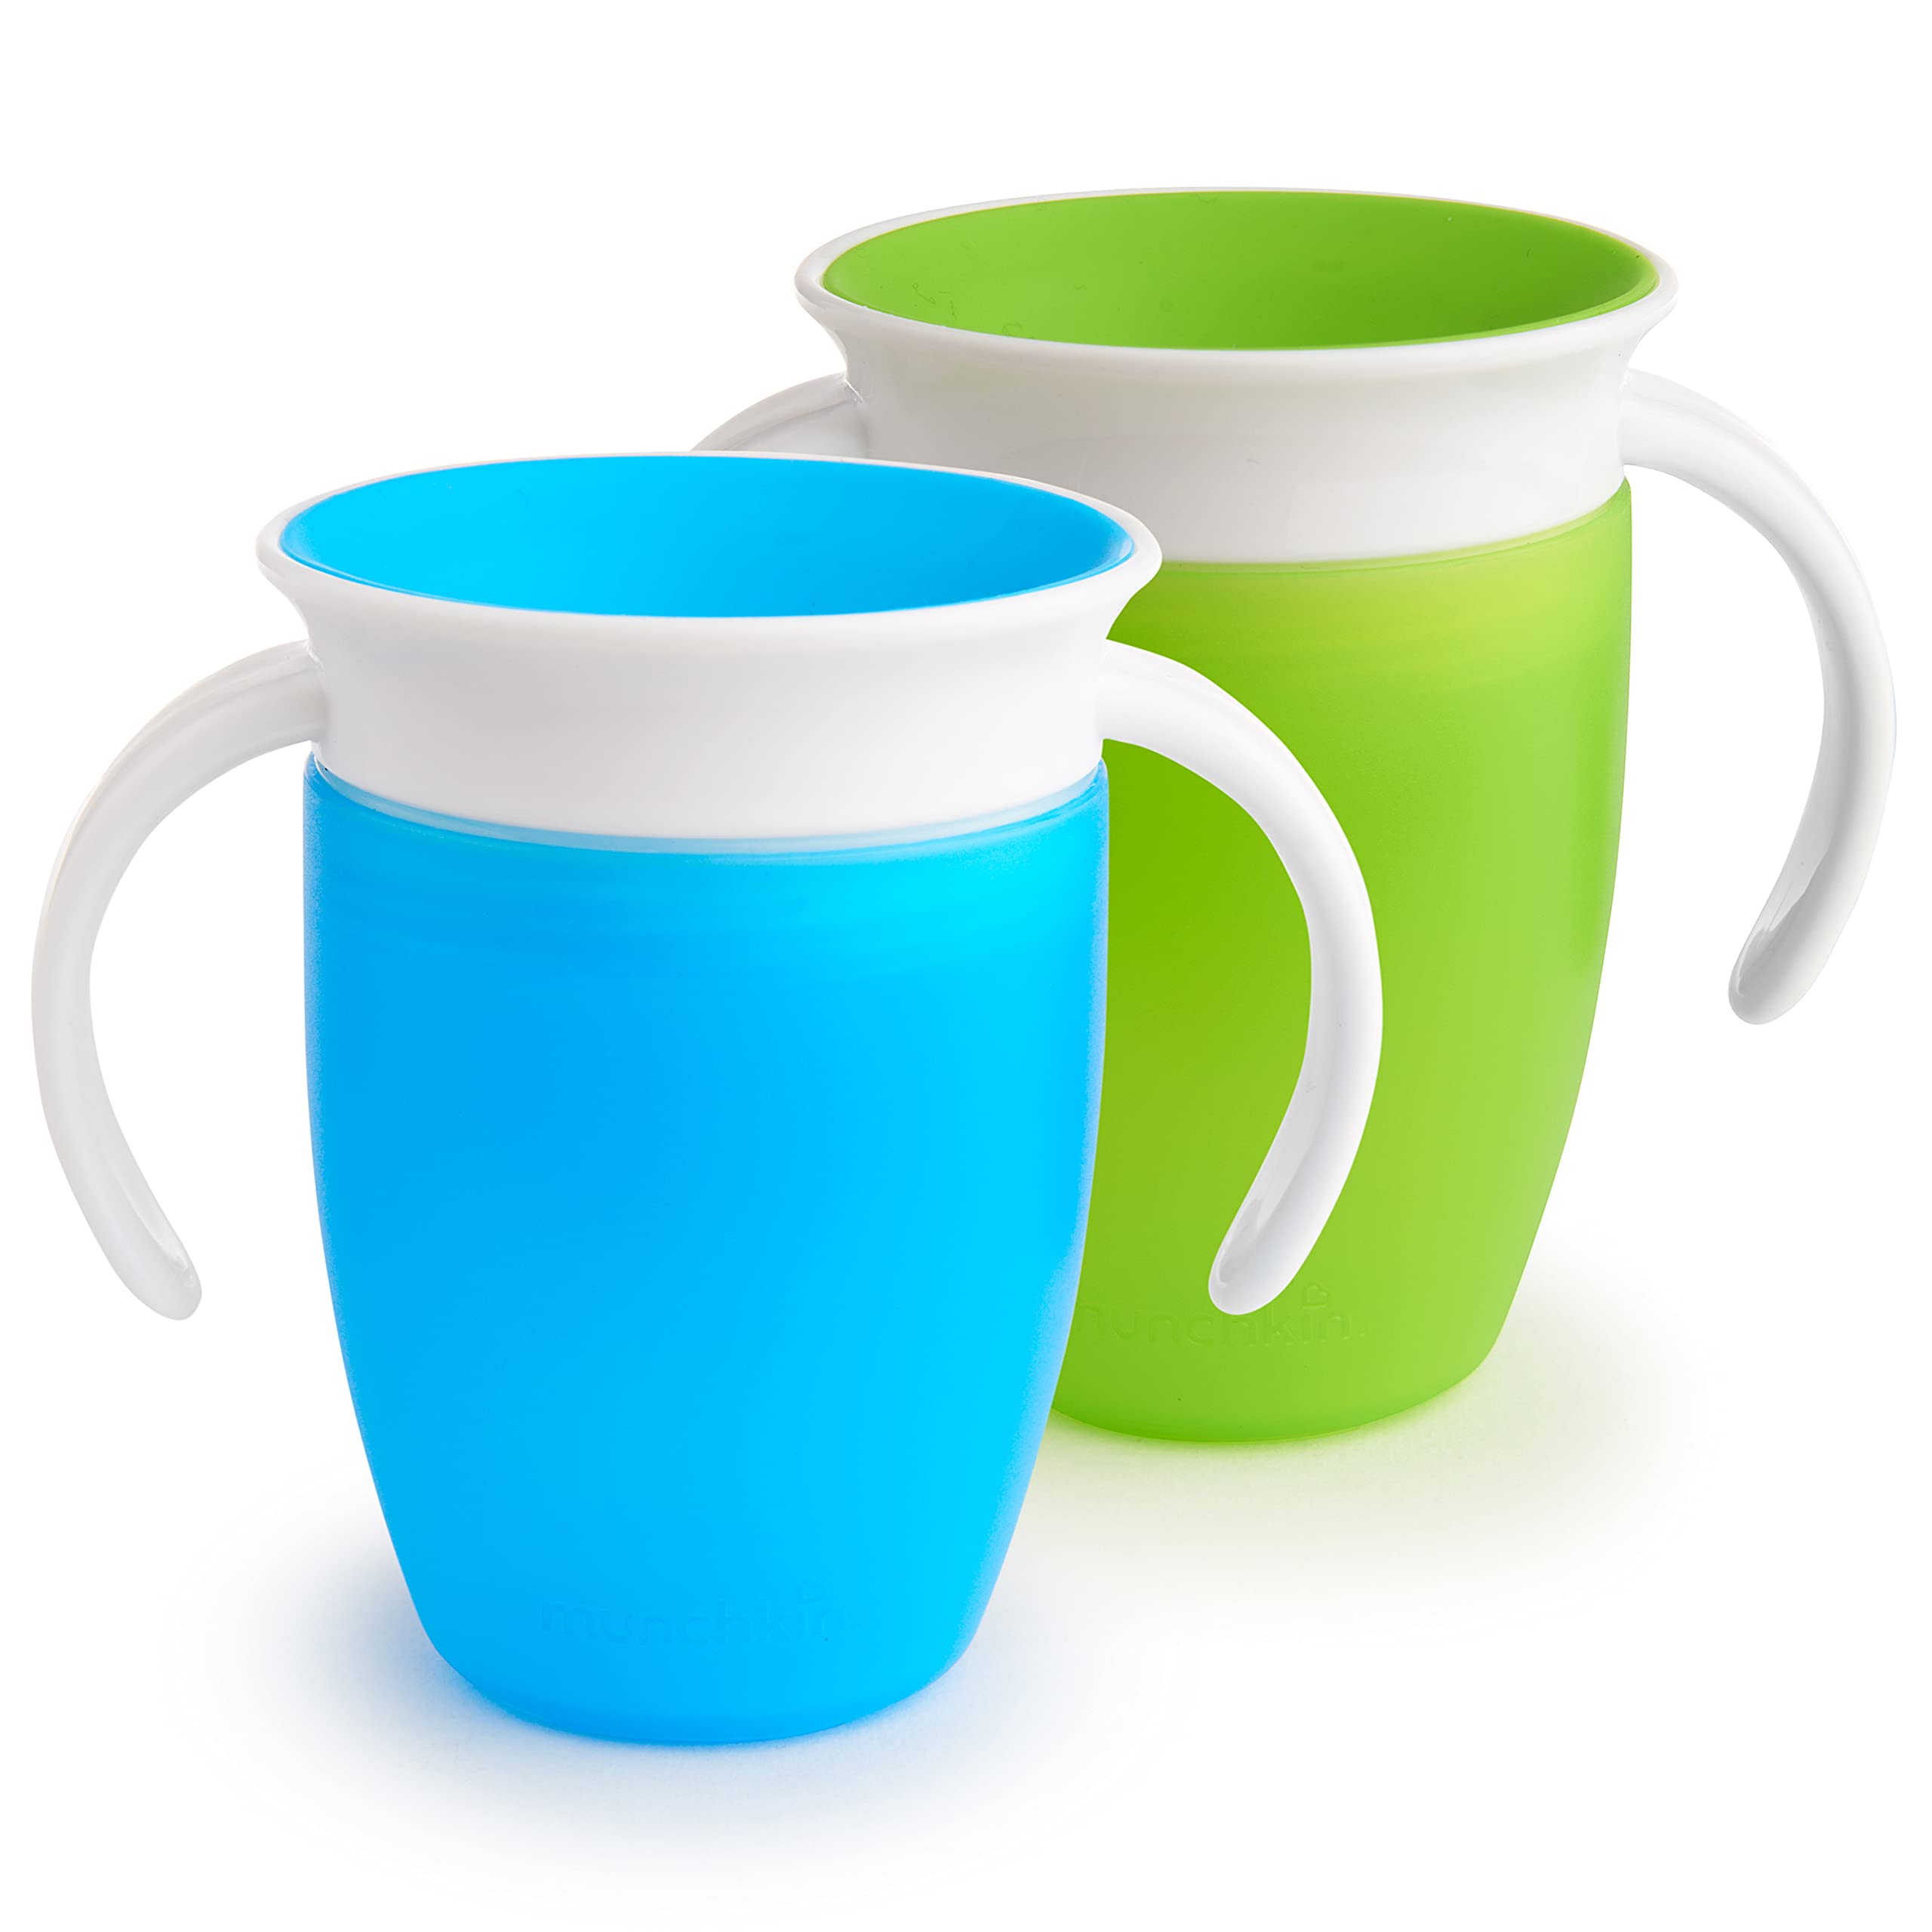 Munchkin® Miracle® 360 Trainer Sippy Cup, 7 Ounce, 2 Pack, Green/Blue